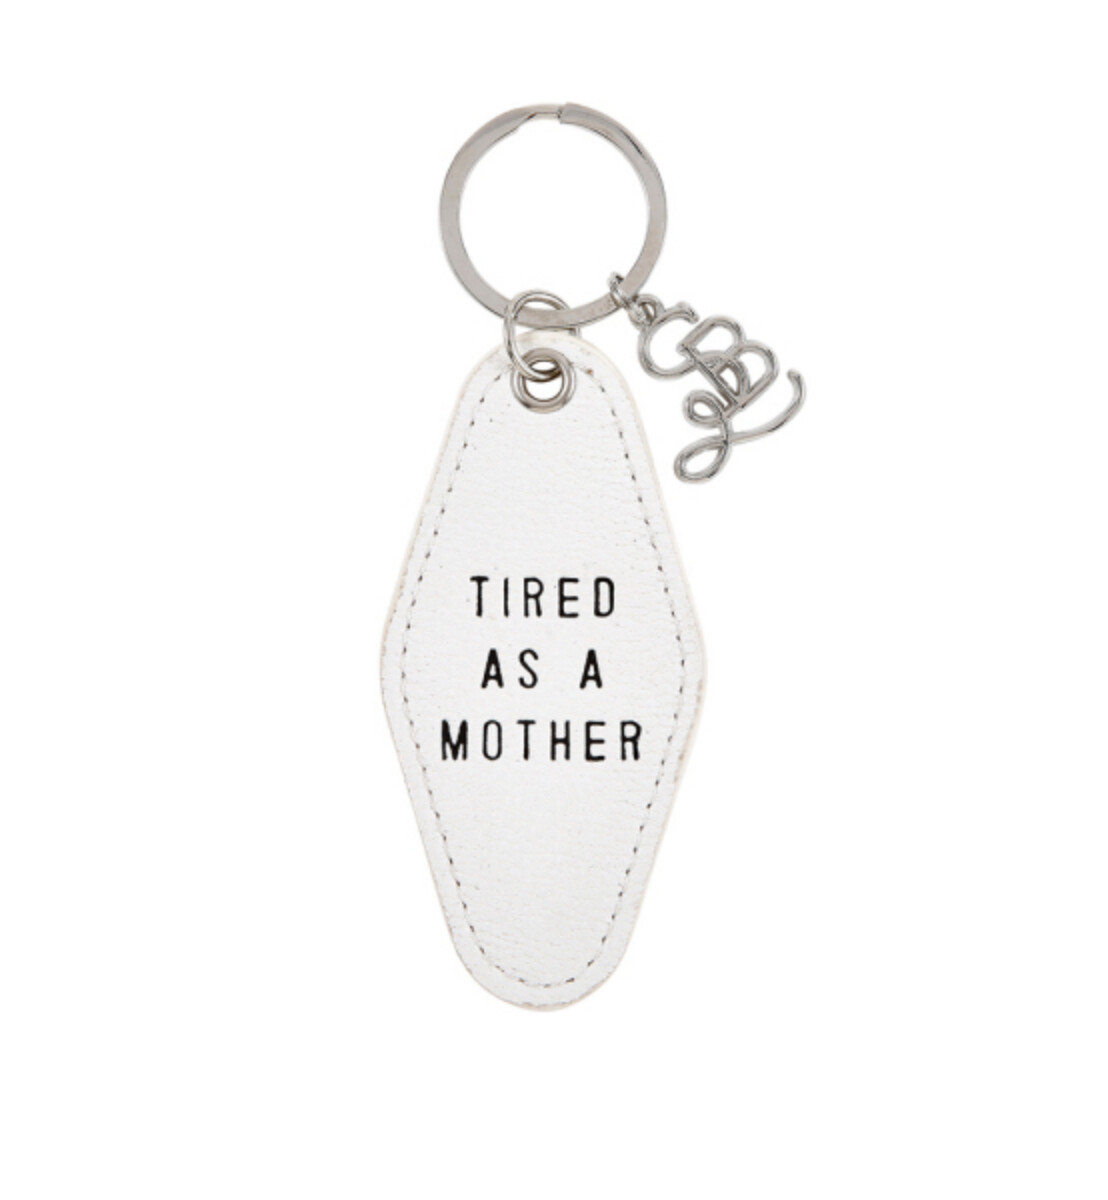 Tired as a Mother Key Tag